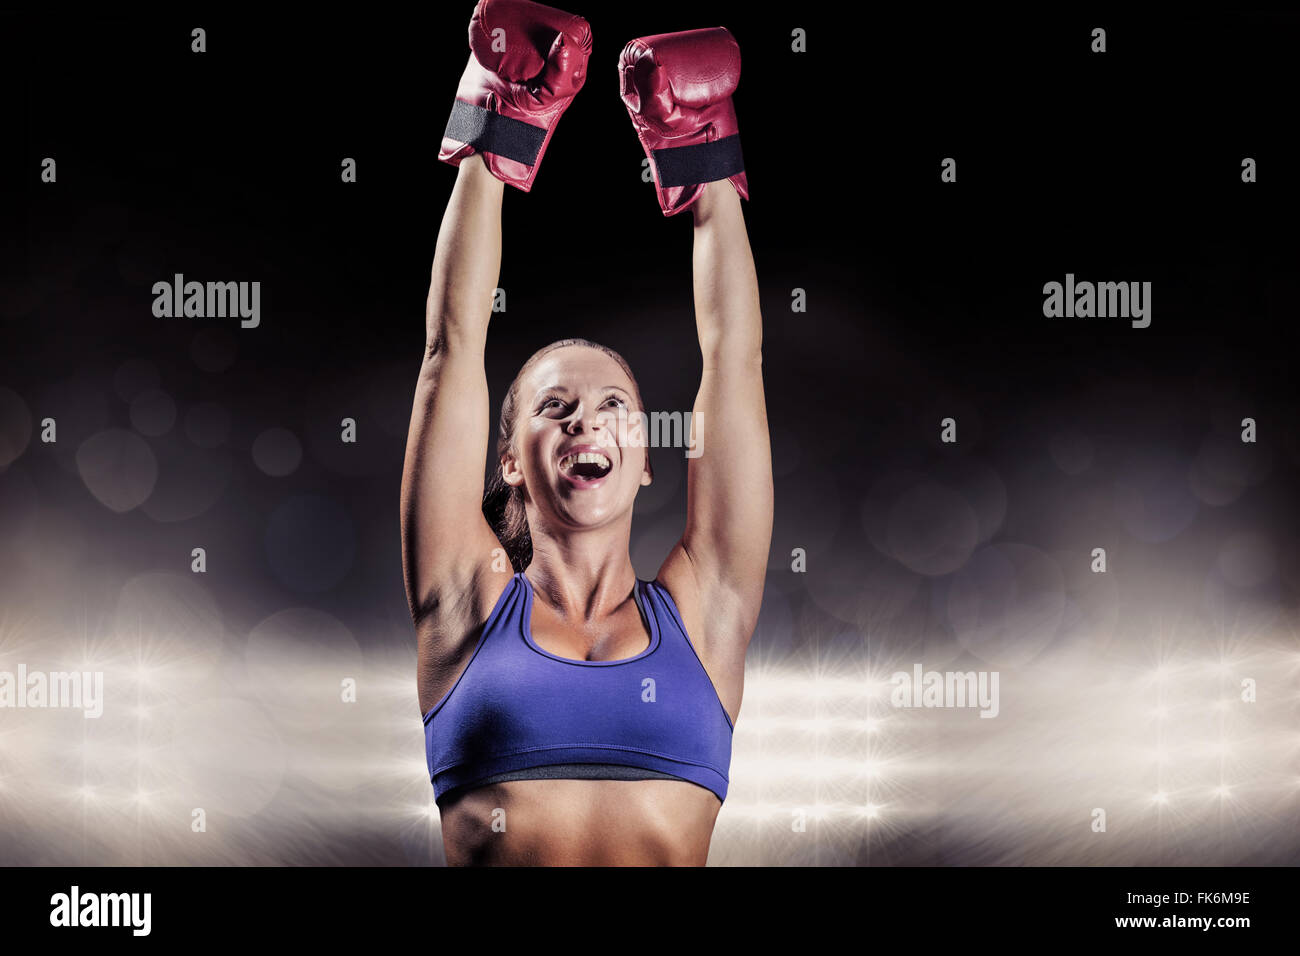 Image composite de gagner fighter with arms raised Banque D'Images